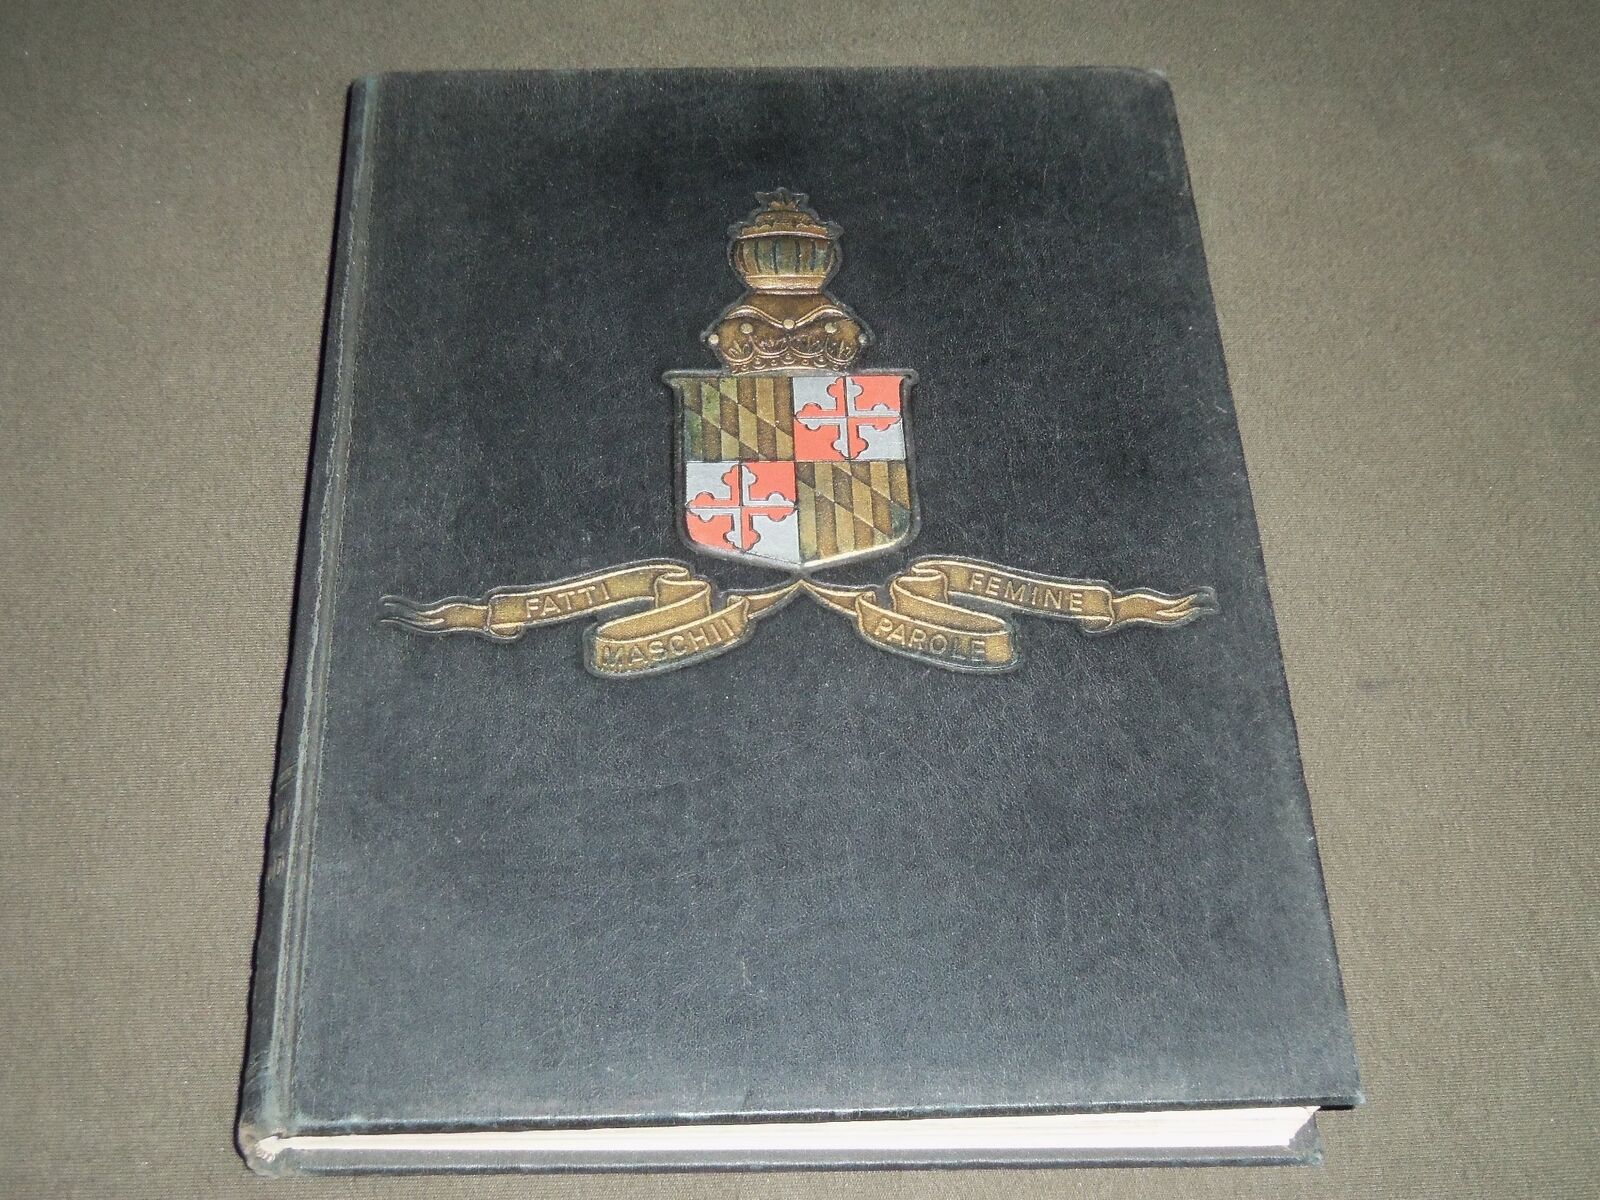 1957 TERRAPIN UNIVERSITY OF MARYLAND COLLEGE YEARBOOK - GREAT PHOTOS - YB 1169